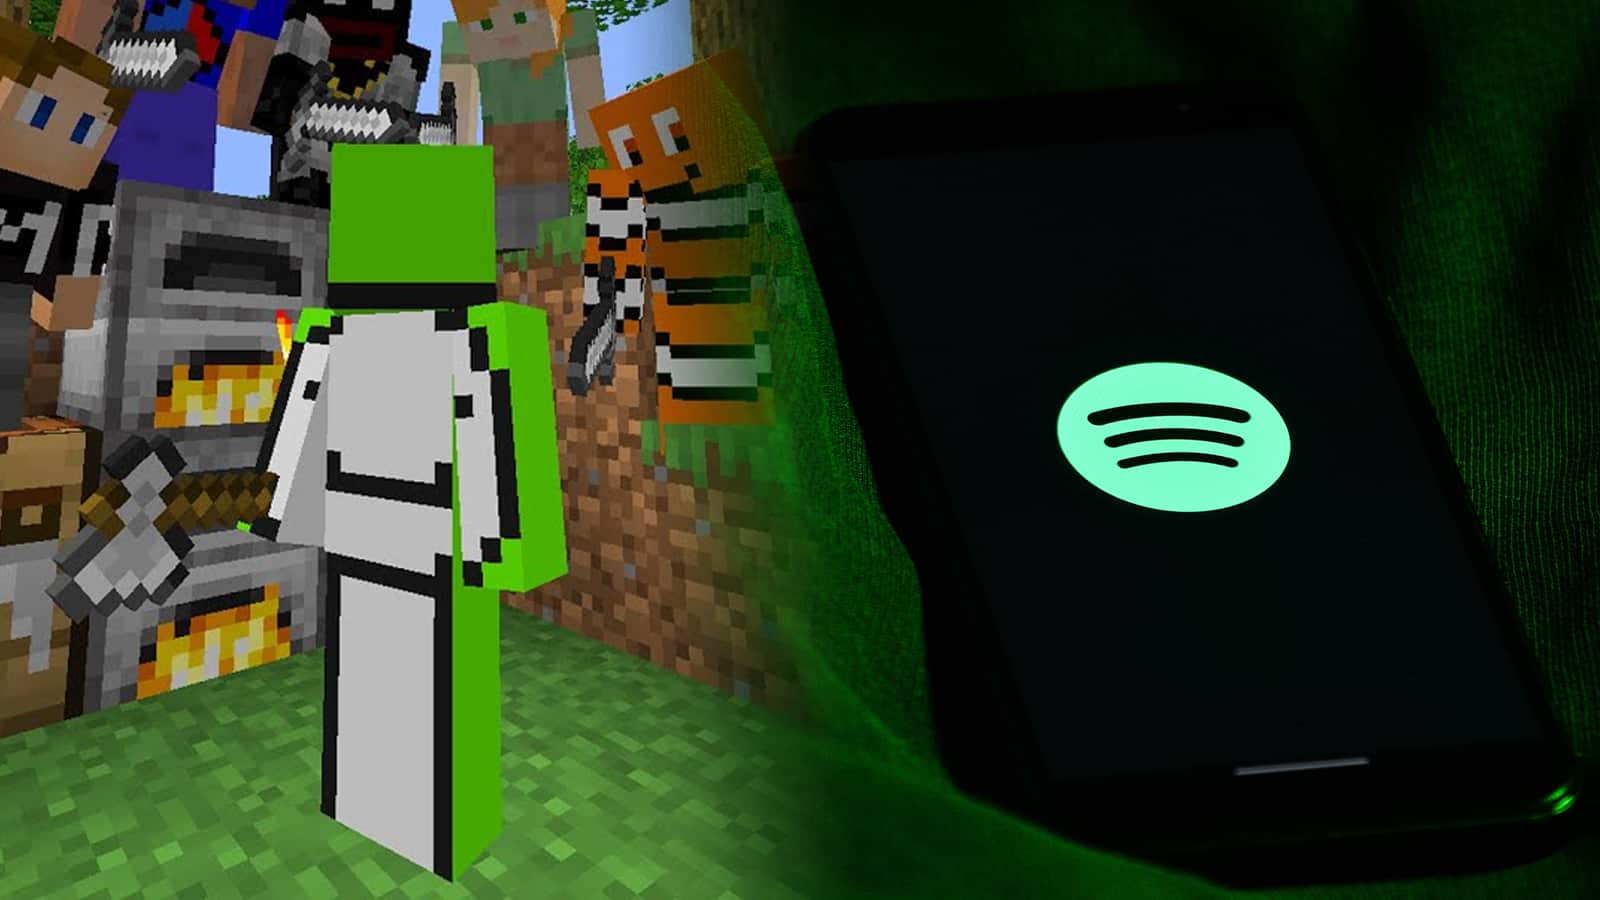 Dream Minecraft character next to Spotify logo on phone